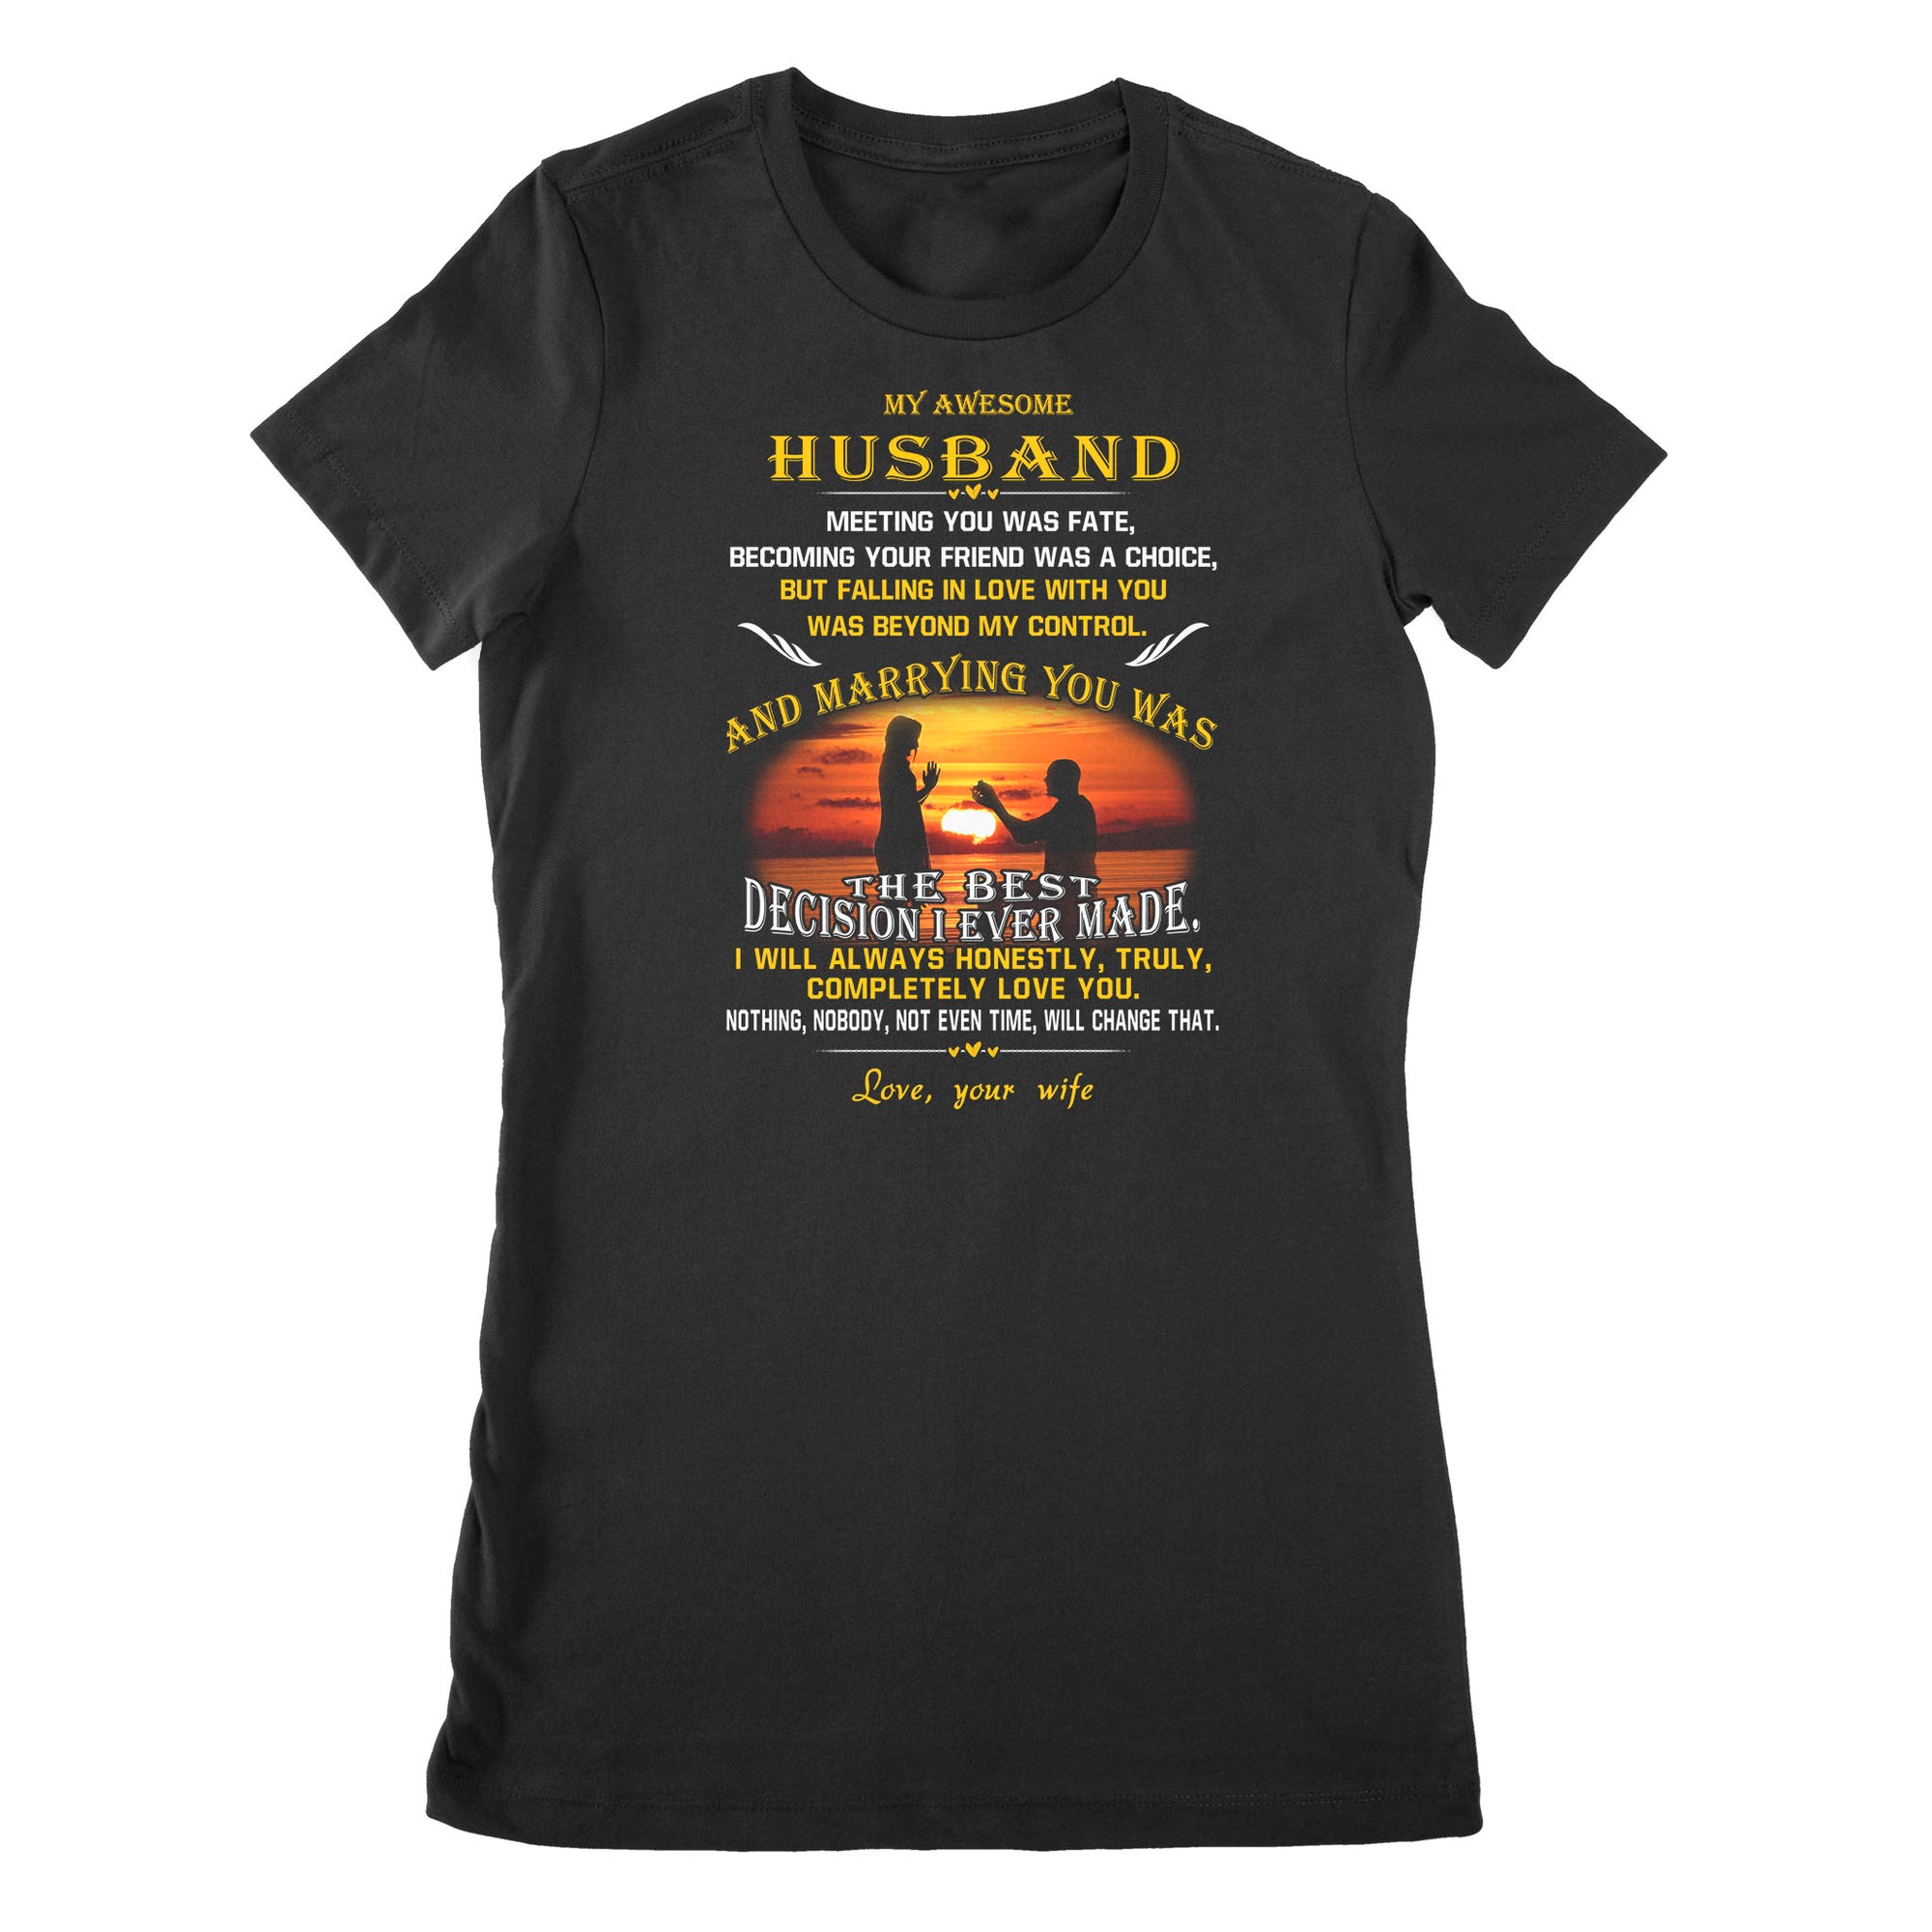 Premium Women's T-shirt - My Awesome Husband Meeting You Was Fate Becoming Your Friend Was A Choice